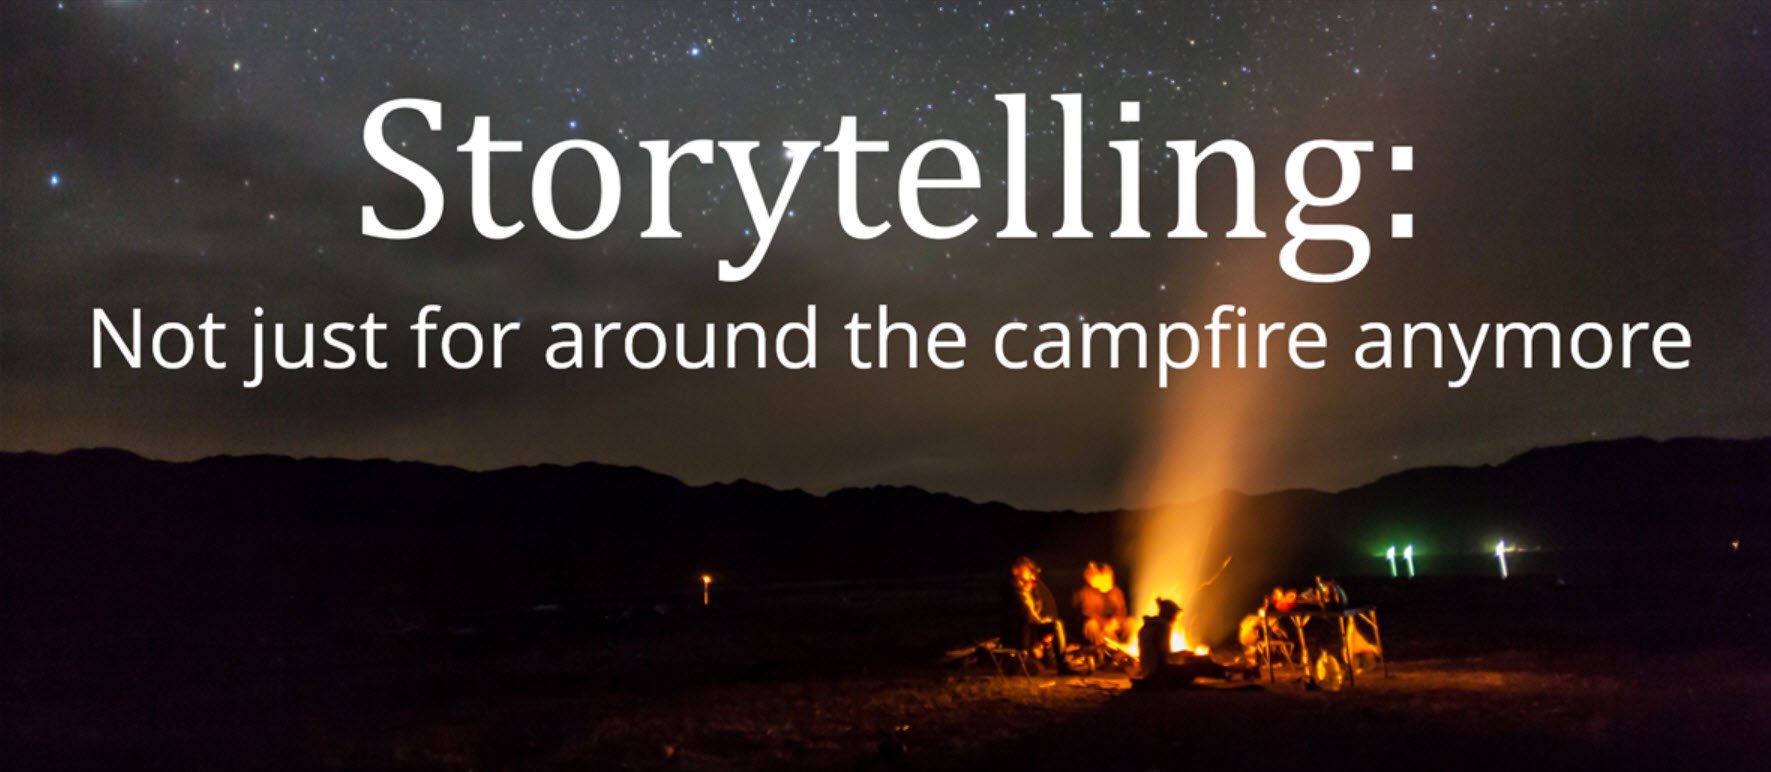 Corporate storytelling for work